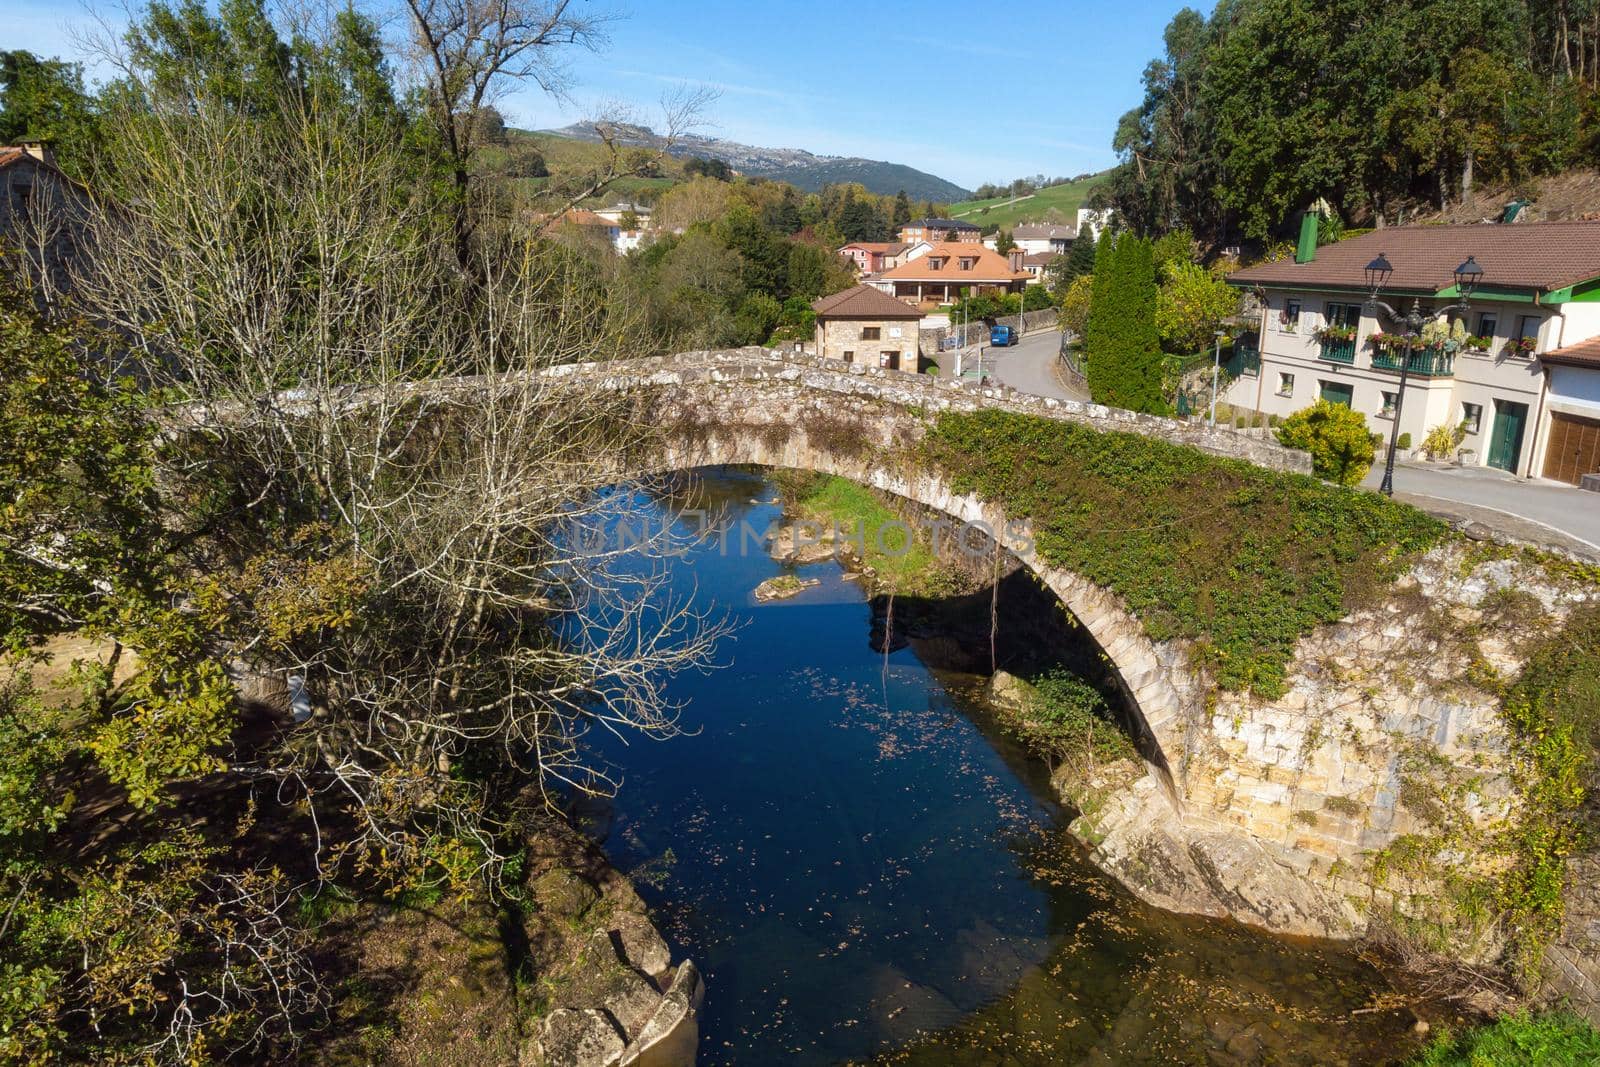 Aerial view of a scenic medieval bridge in Lierganes, Cantabria, Spain. by HERRAEZ